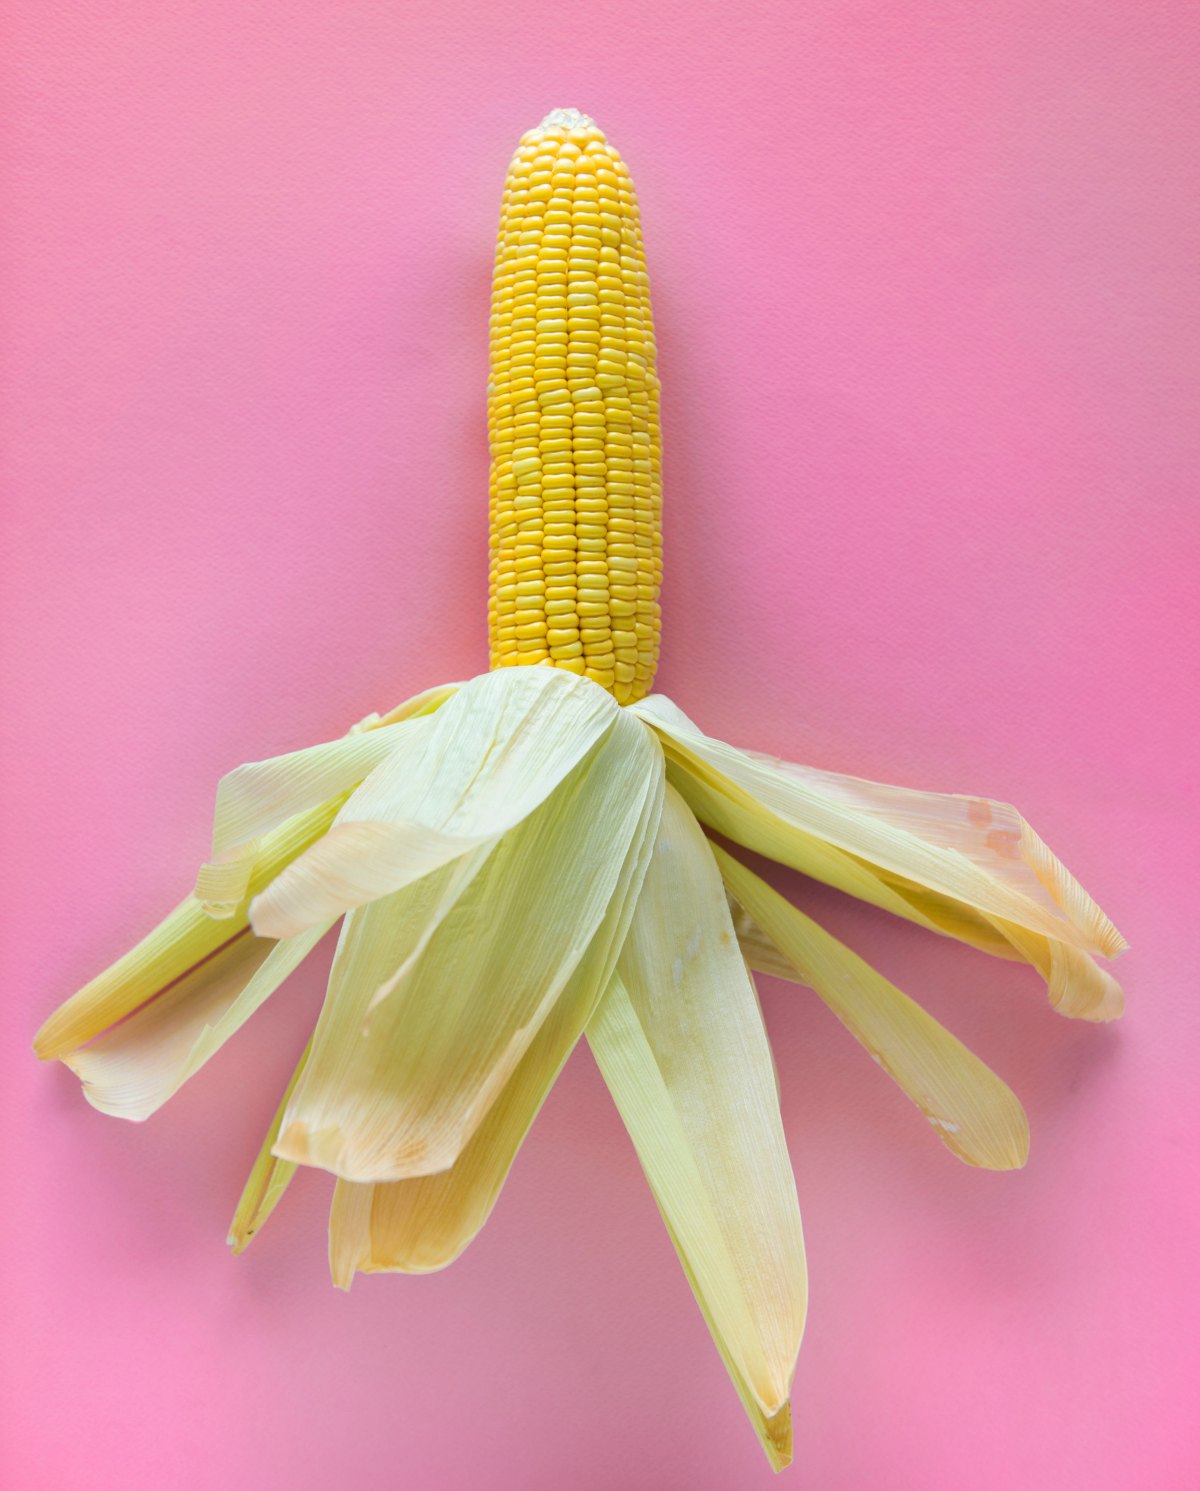 Know Your Ingredients: The Many Names of Corn